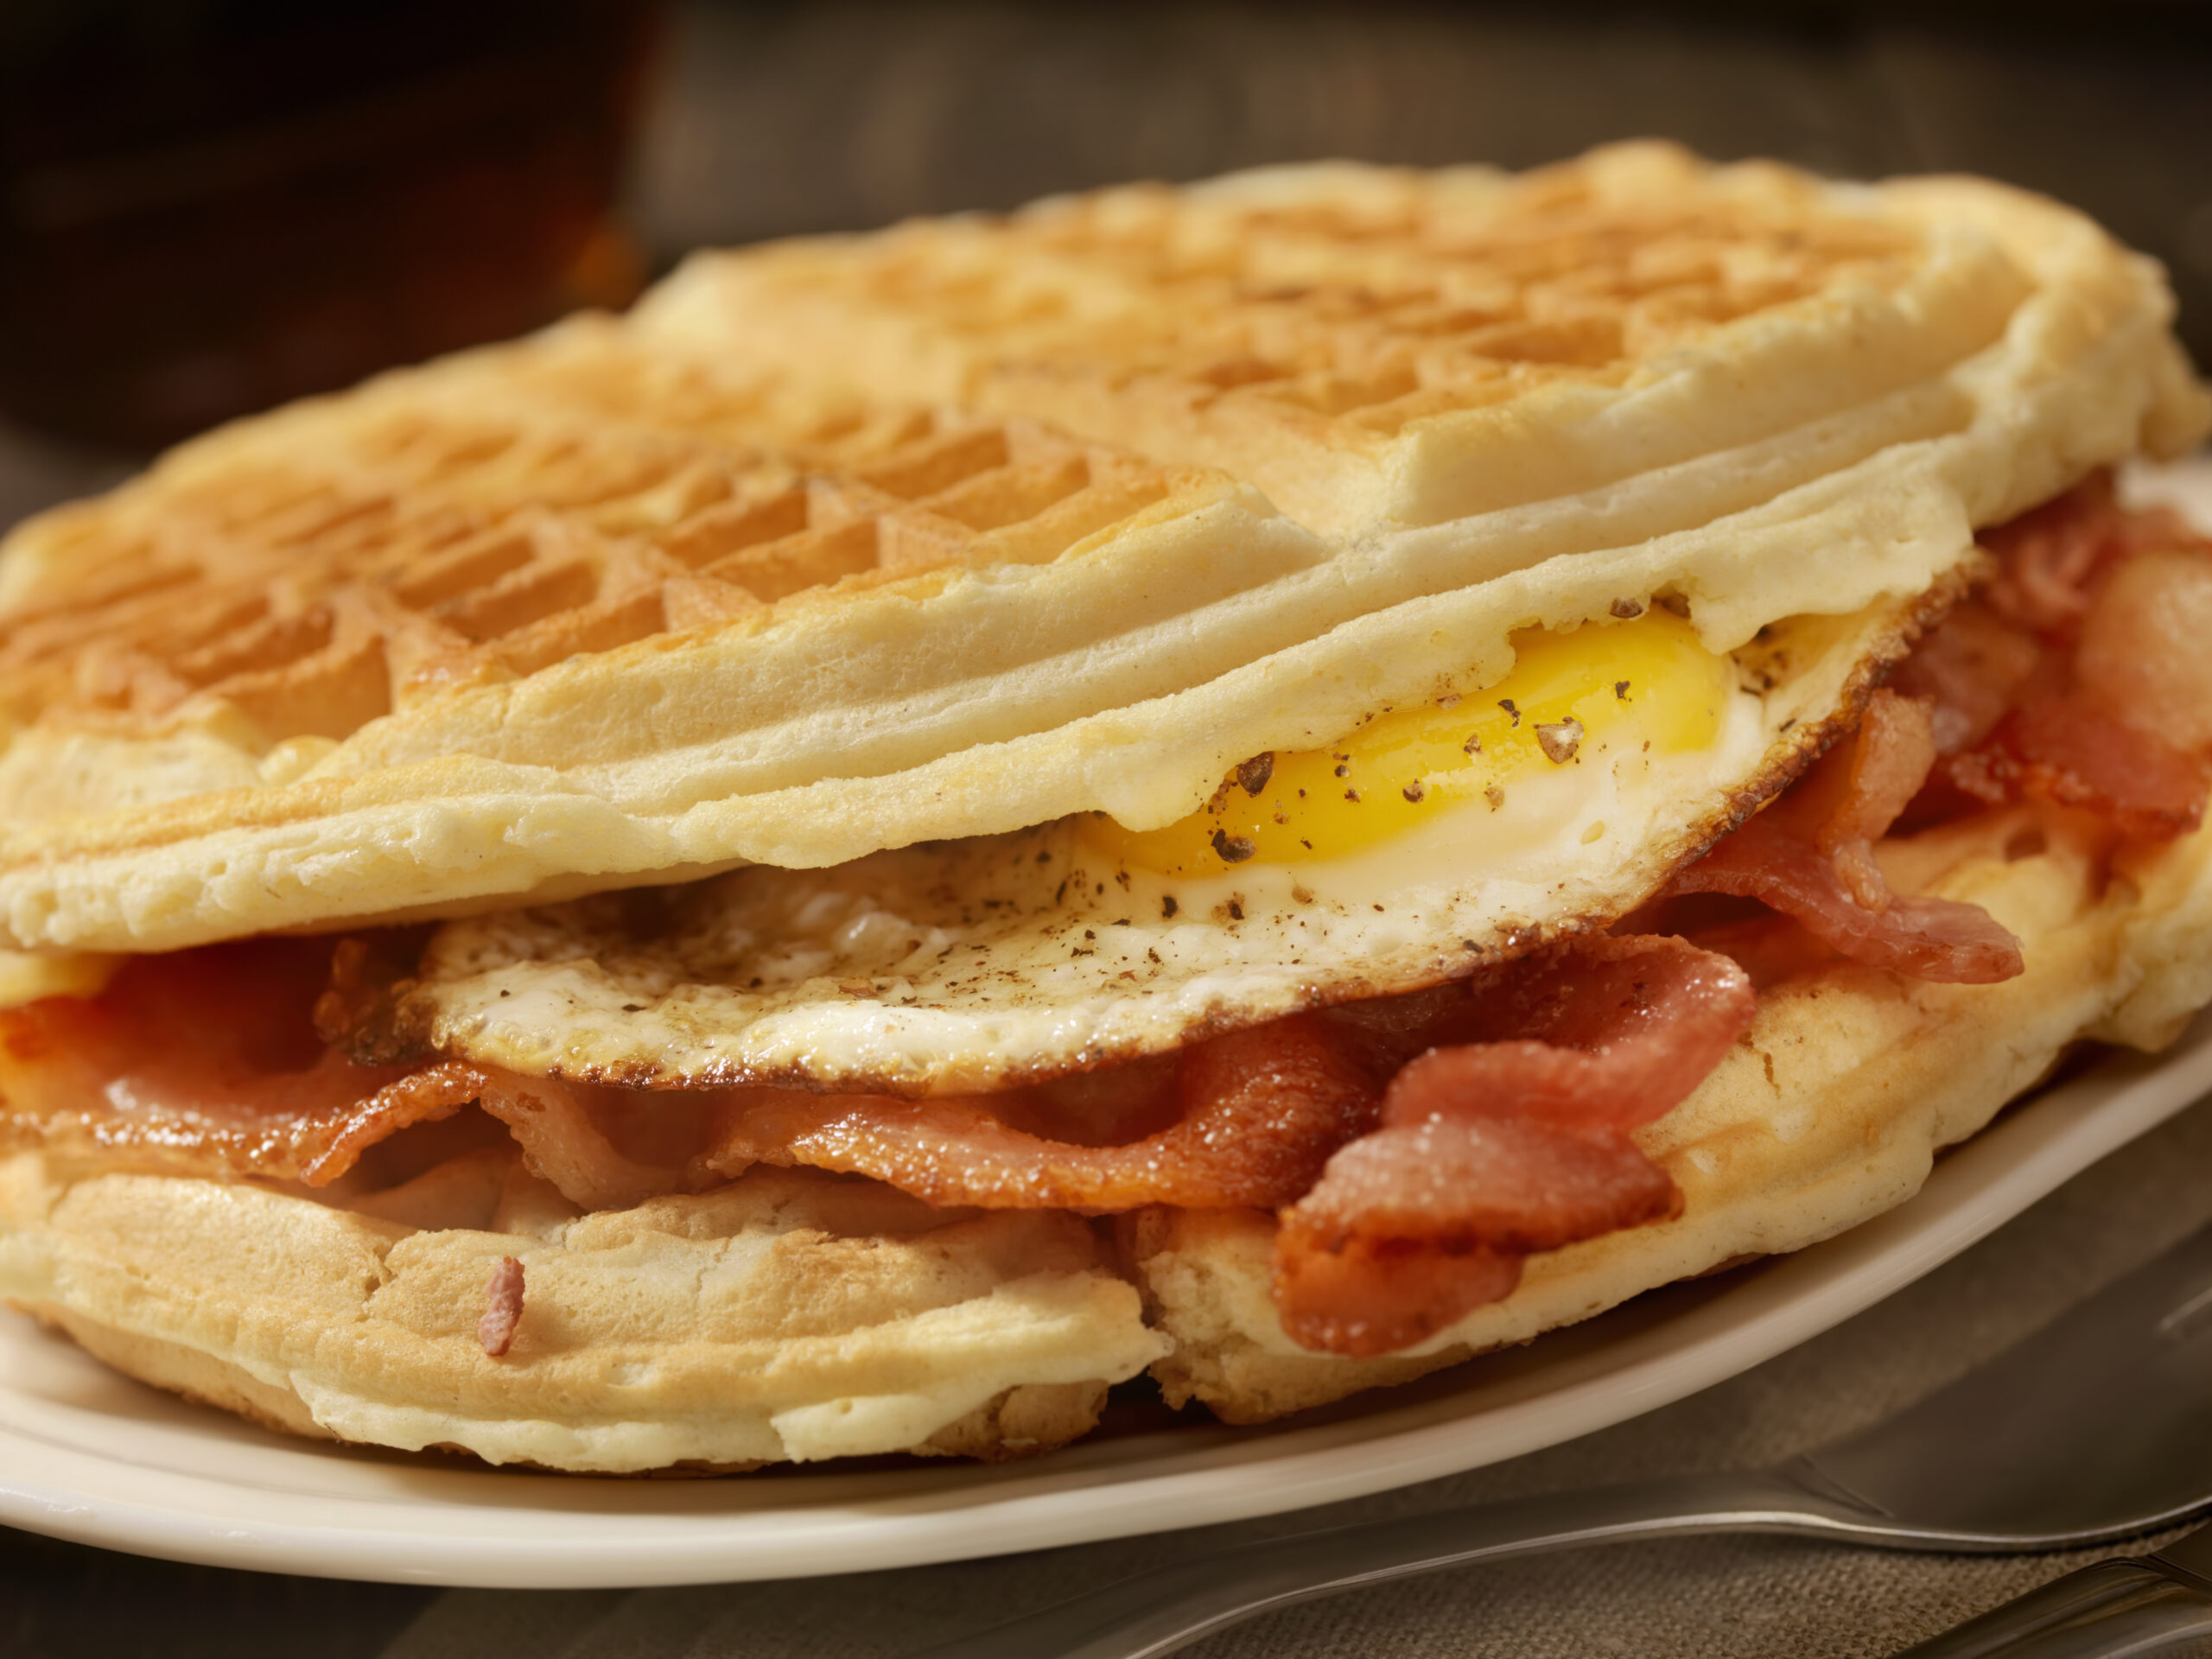 Fried Egg and Bacon Waffle Sandwich-Photographed on Hasselblad H3D2-39mb Camera